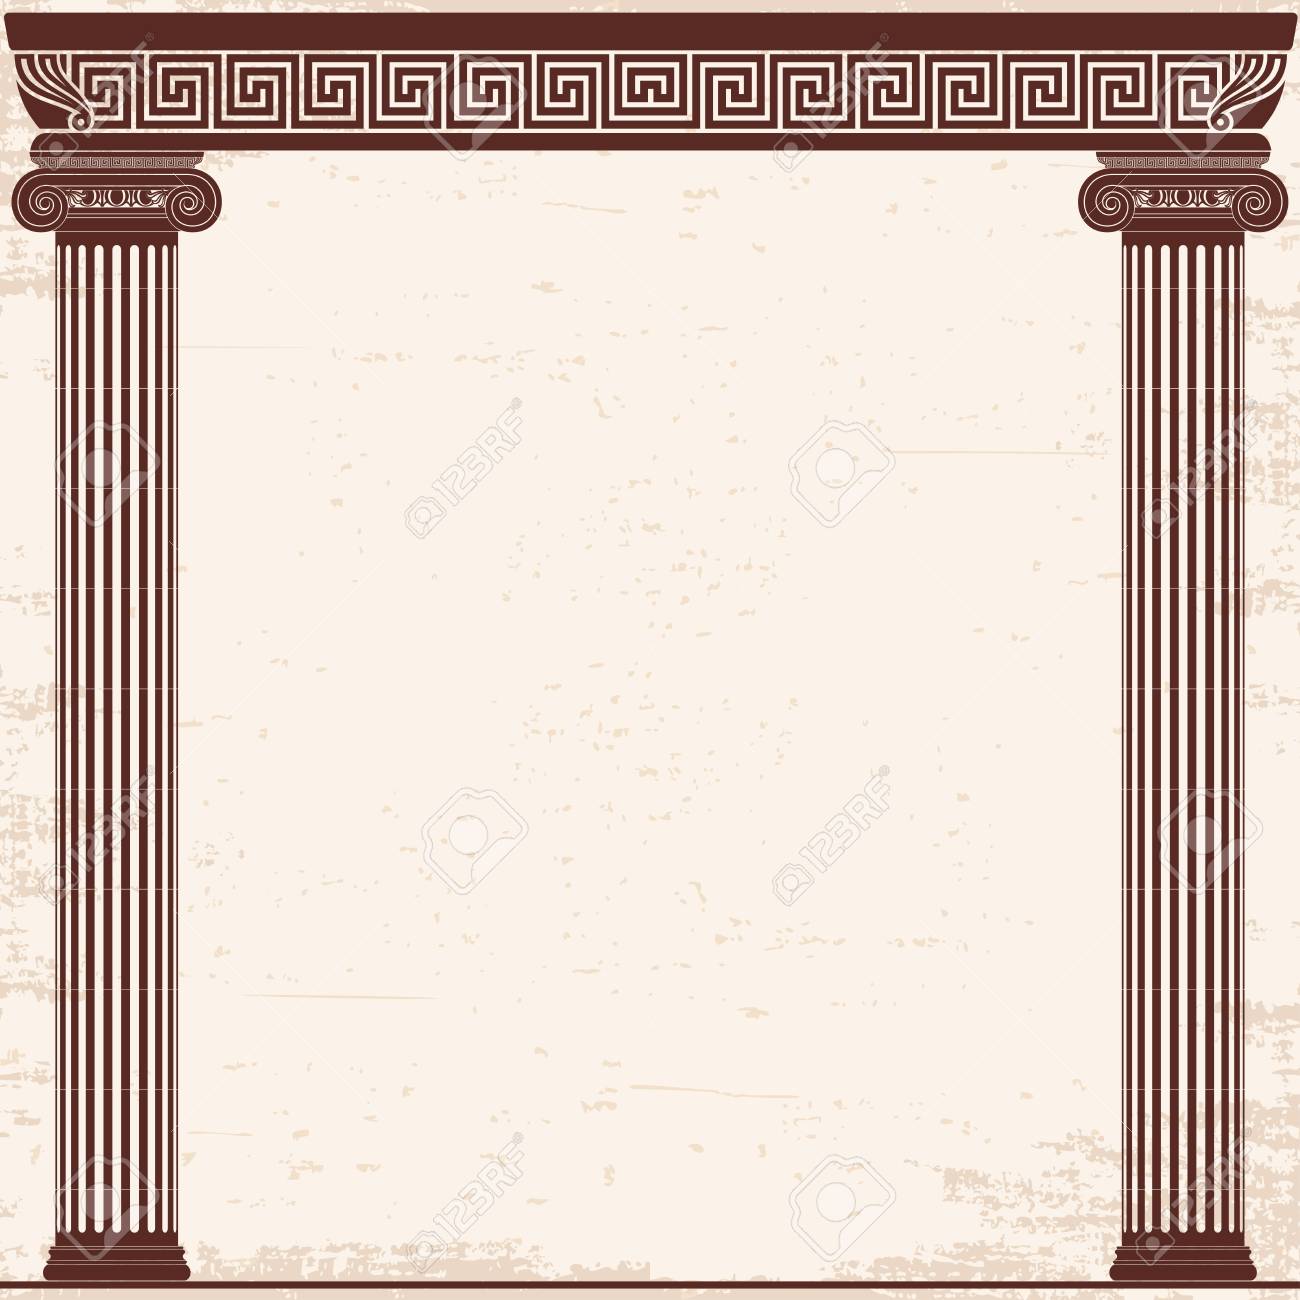 Ancient Greek Background With Four Columns And A National Ornament